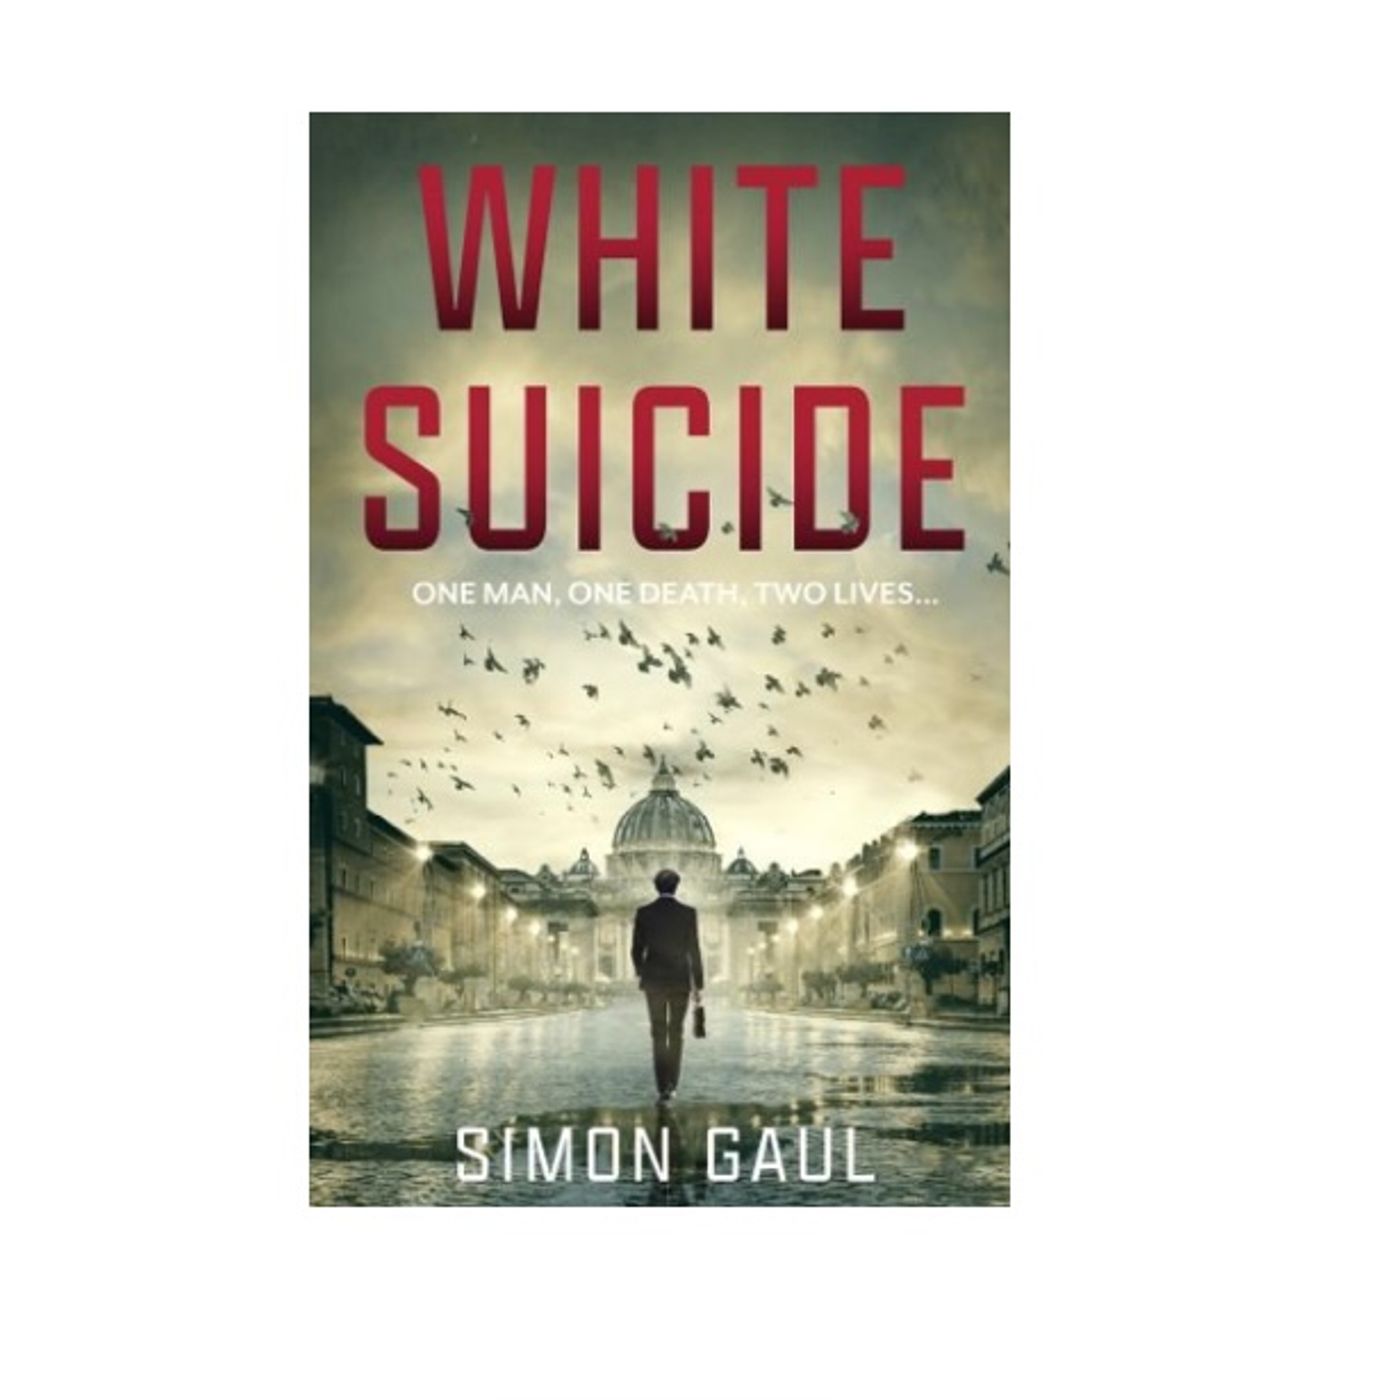 Interview on the Aldo Moro Affair with Simon Gaul, Author of ”White Suicide”